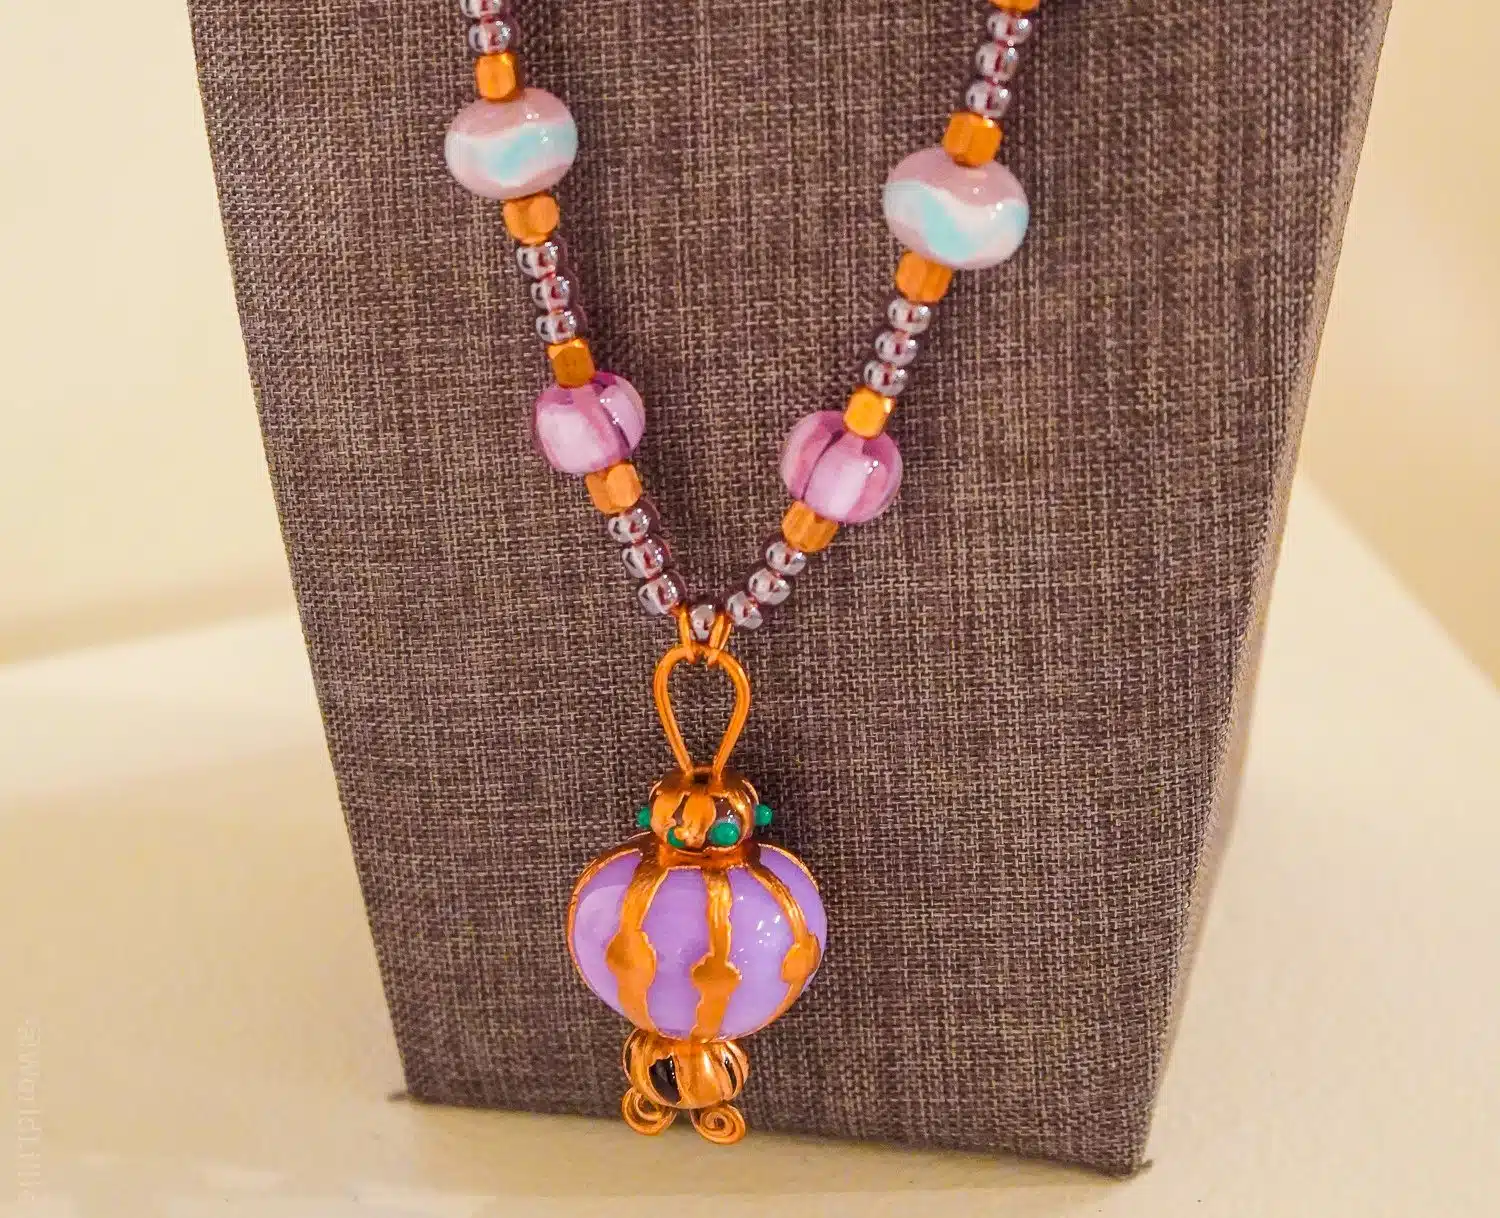 One of Joy's completed glass bead necklaces.